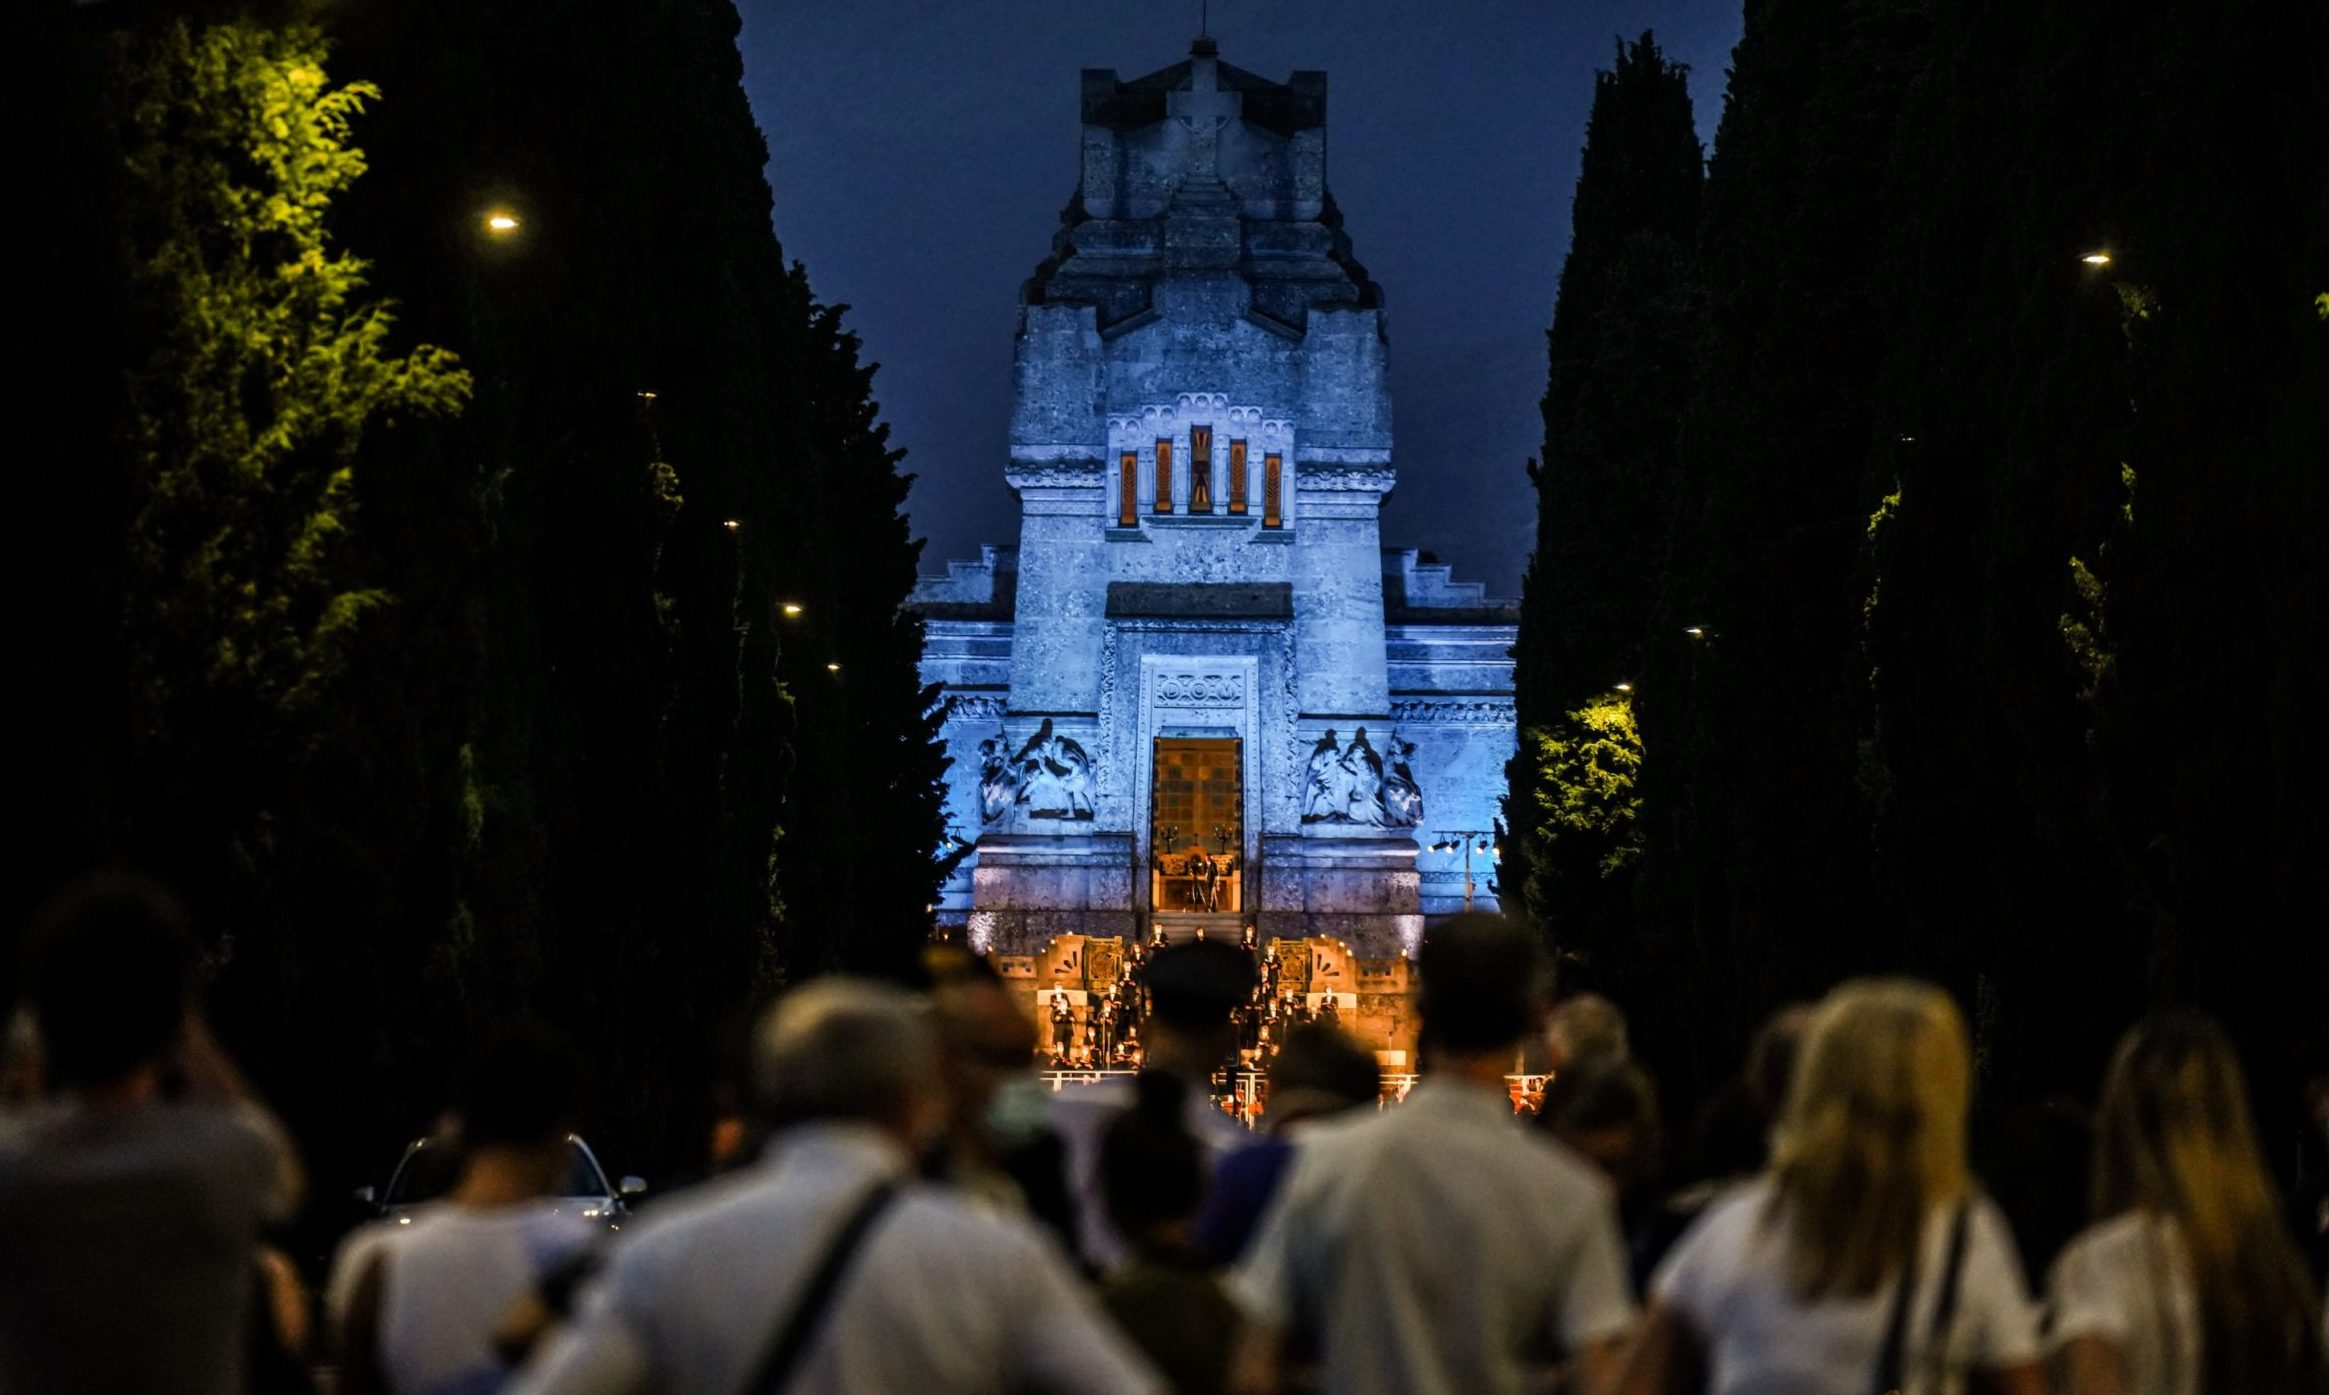 Mandatory Credit: Photo by Nicola Marfisi/AGF/Shutterstock (10695372ar)
Concert for the victims of Covid-19 at the monumental cemetery in Bergamo
Commemoration concert of the victims of Covid-19 at the monumental cemetery of Bergamo, Italy - 28 Jun 2020